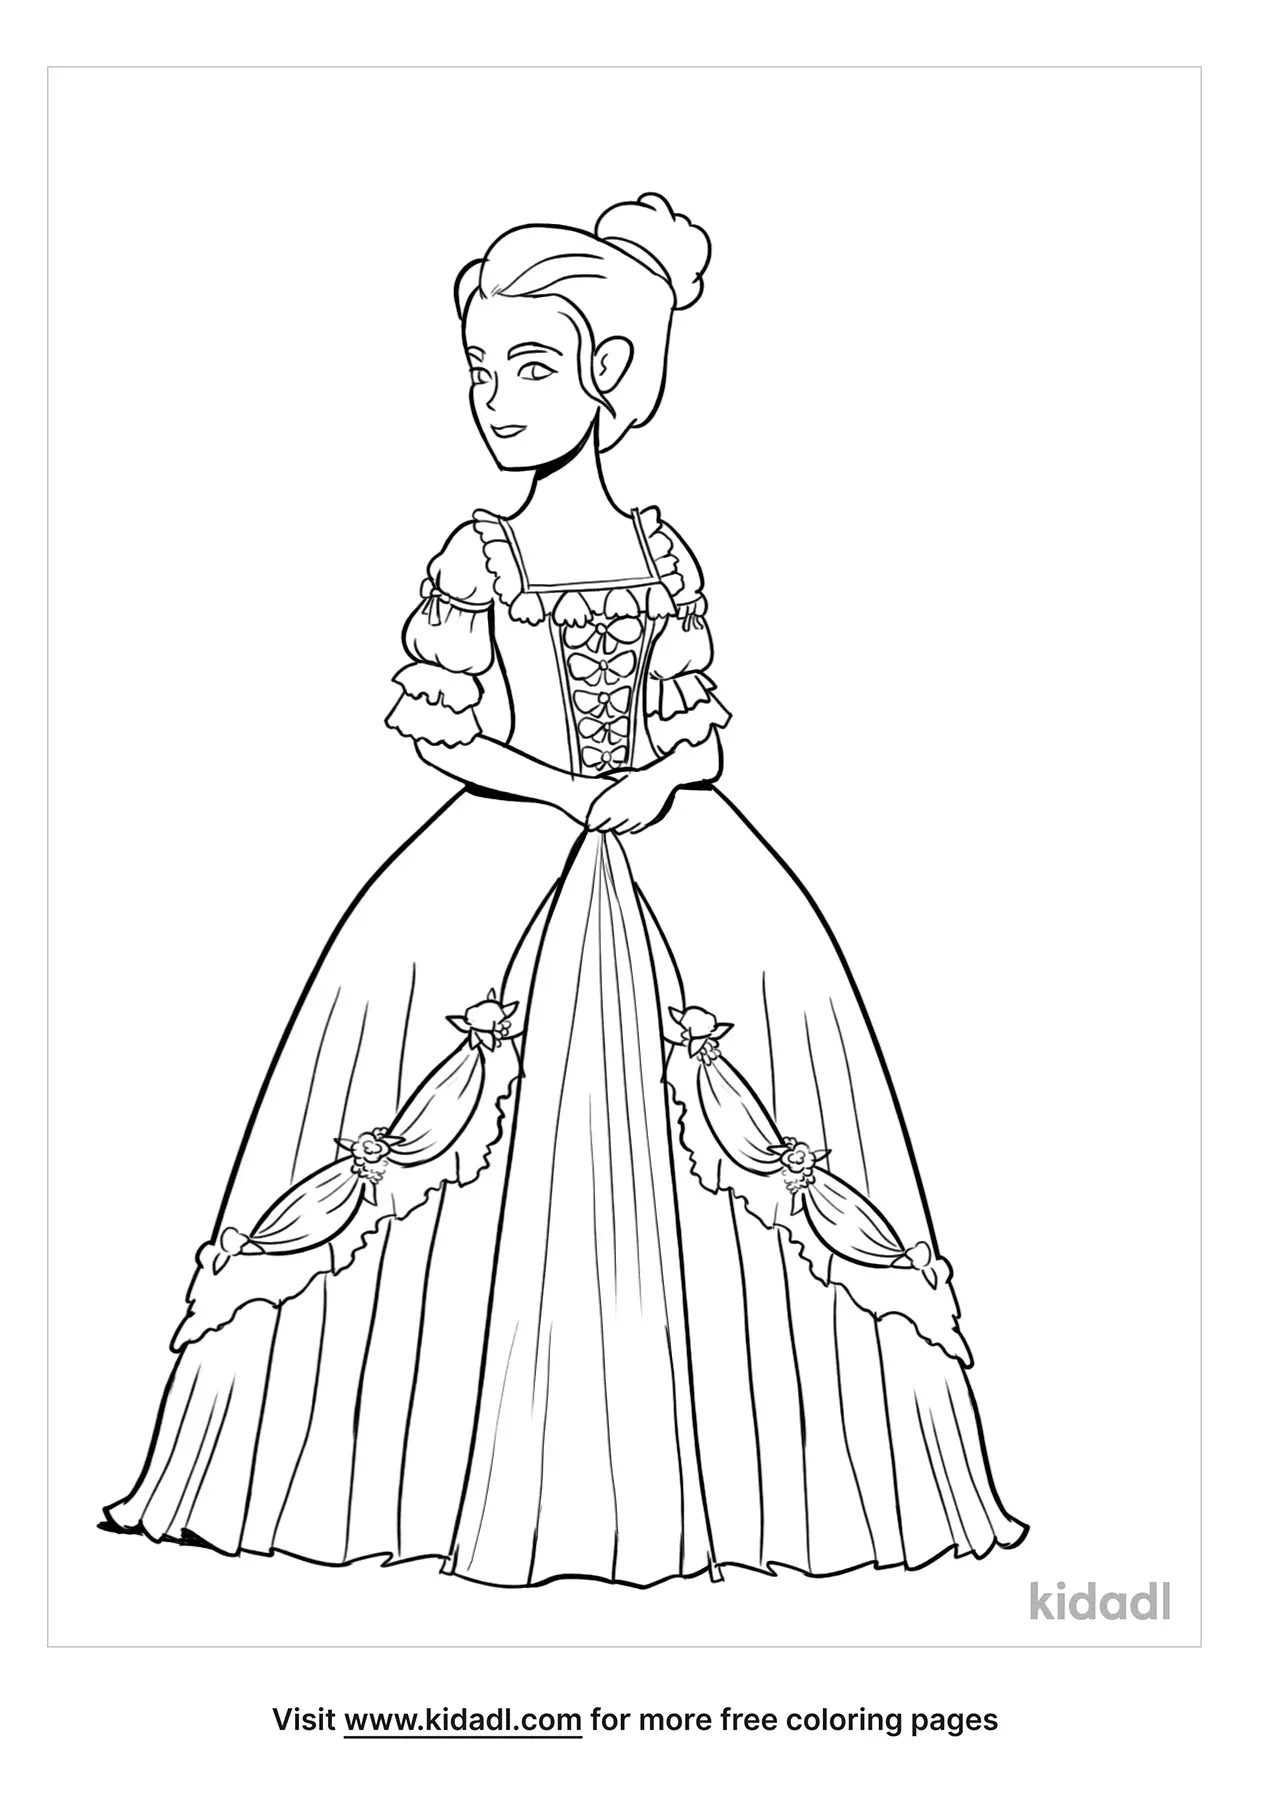 Lady Gaga Coloring Page | Free Famous Coloring Page | Kidadl